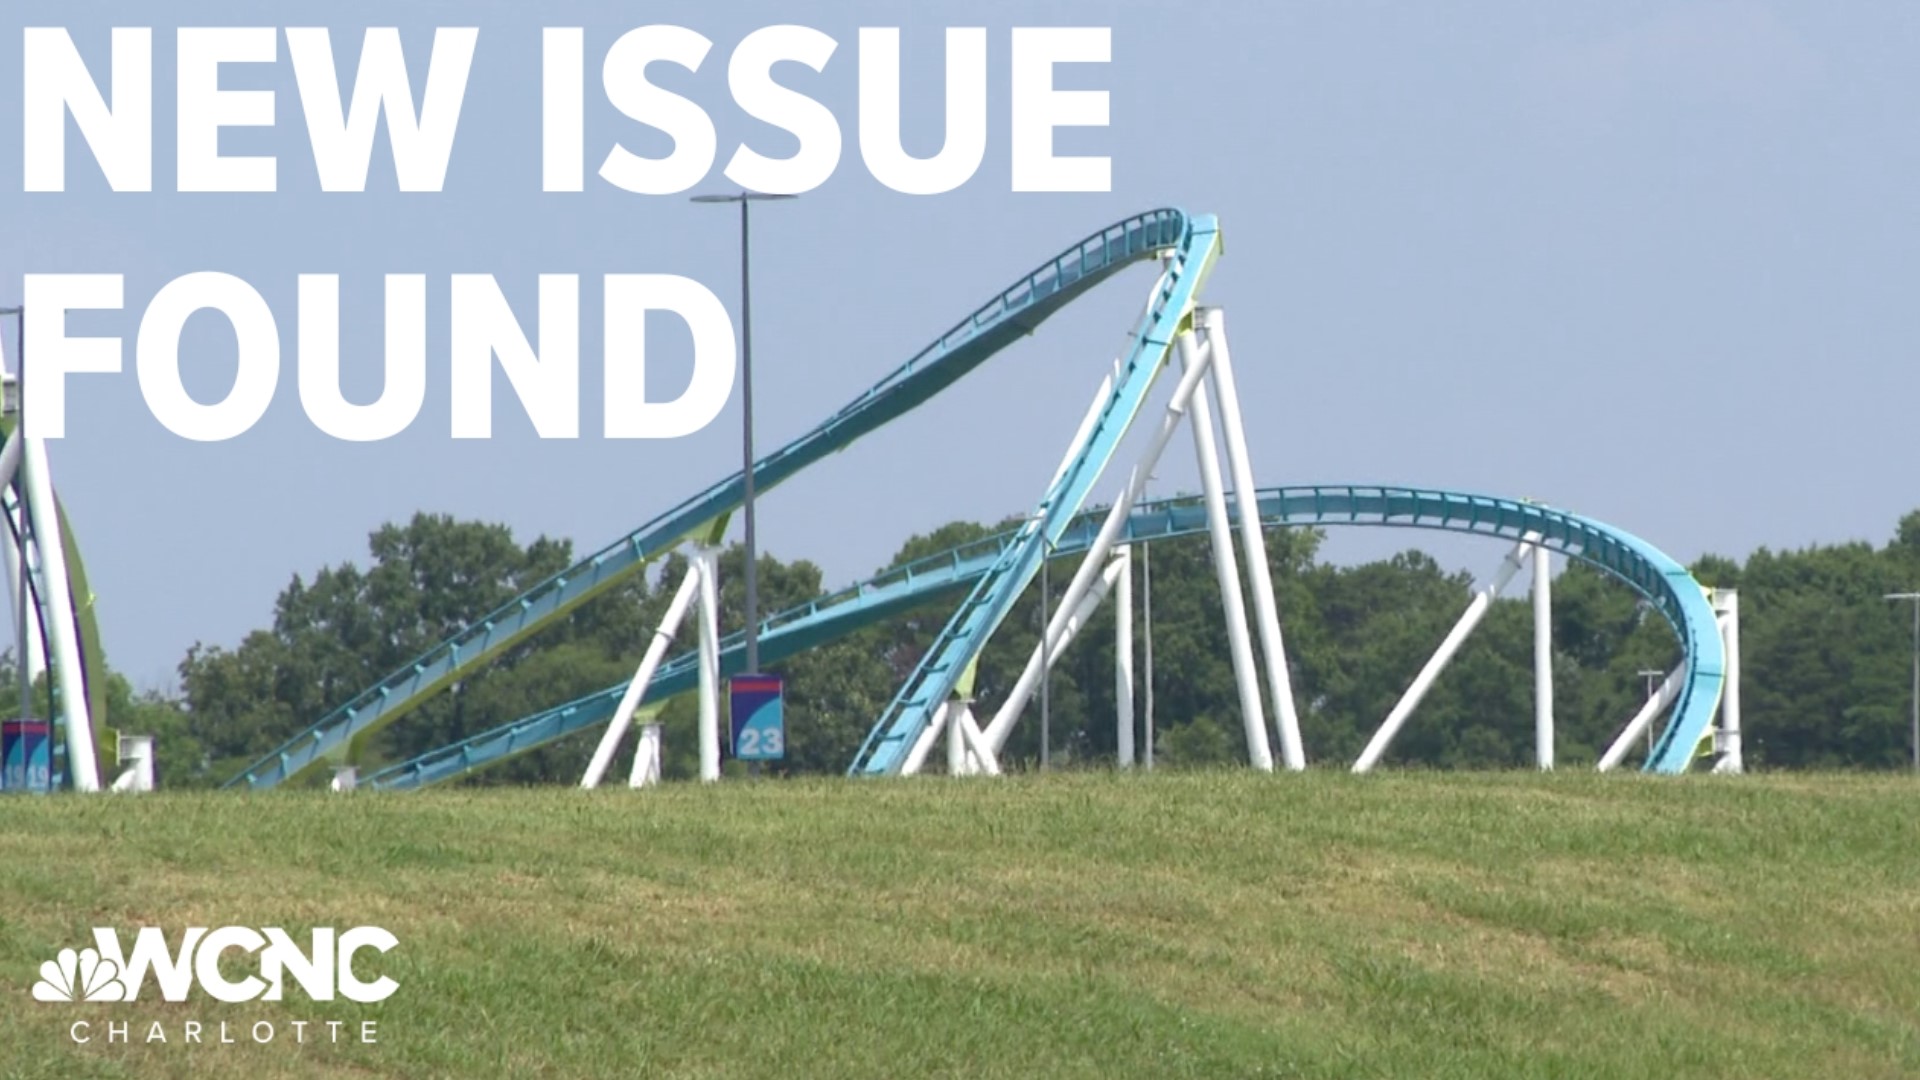 Fury 325 remains closed while the park continues to test the ride after the first crack was discovered.